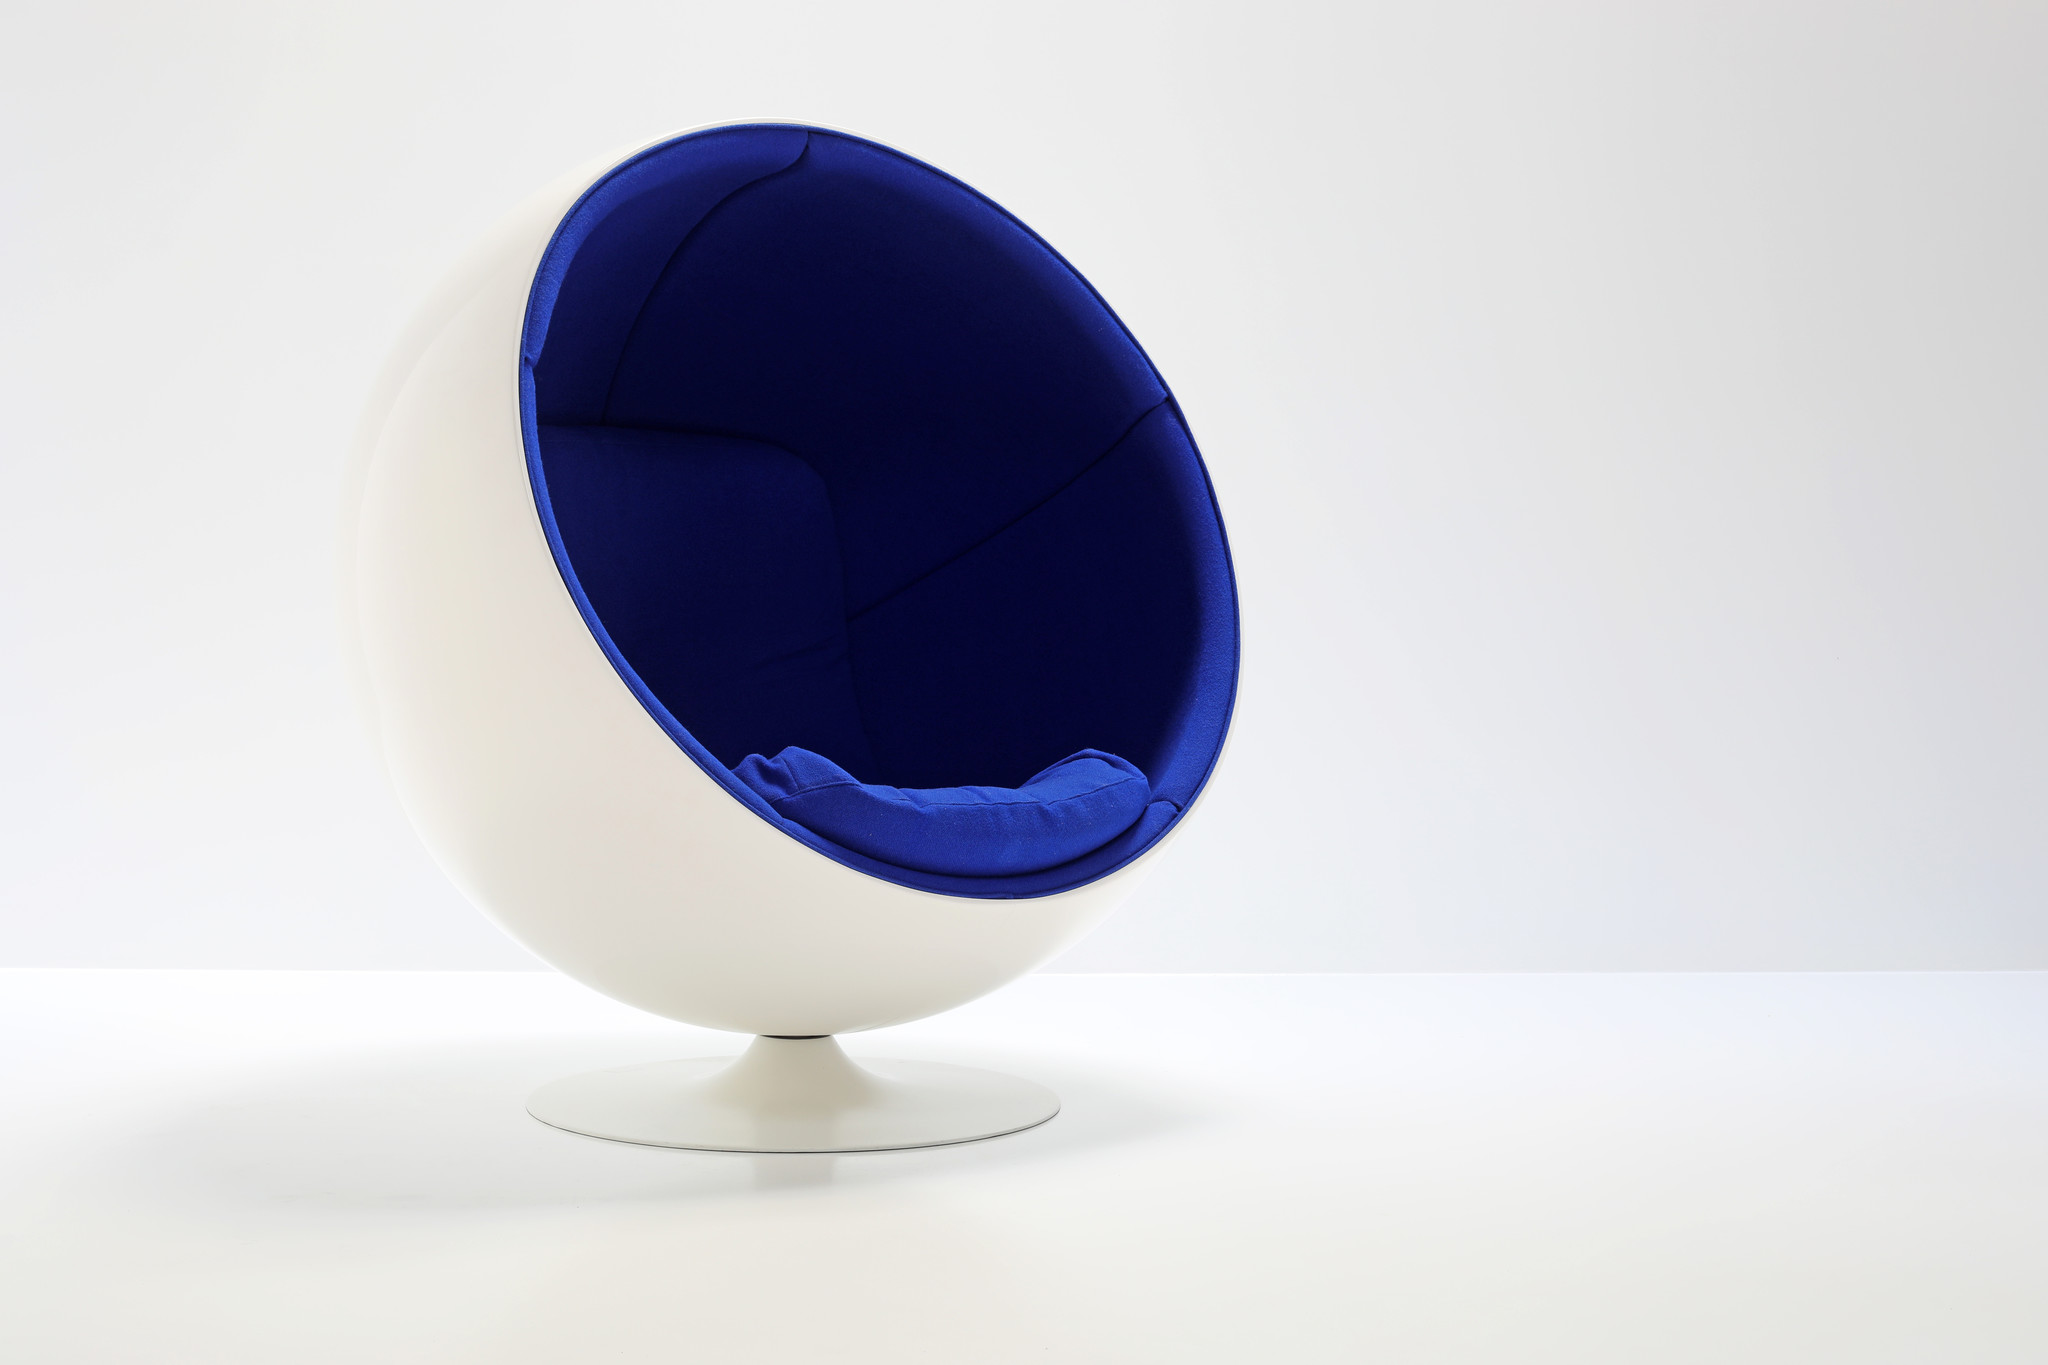 The Ball Chair was designed by Eero Aarnio for Adelta.